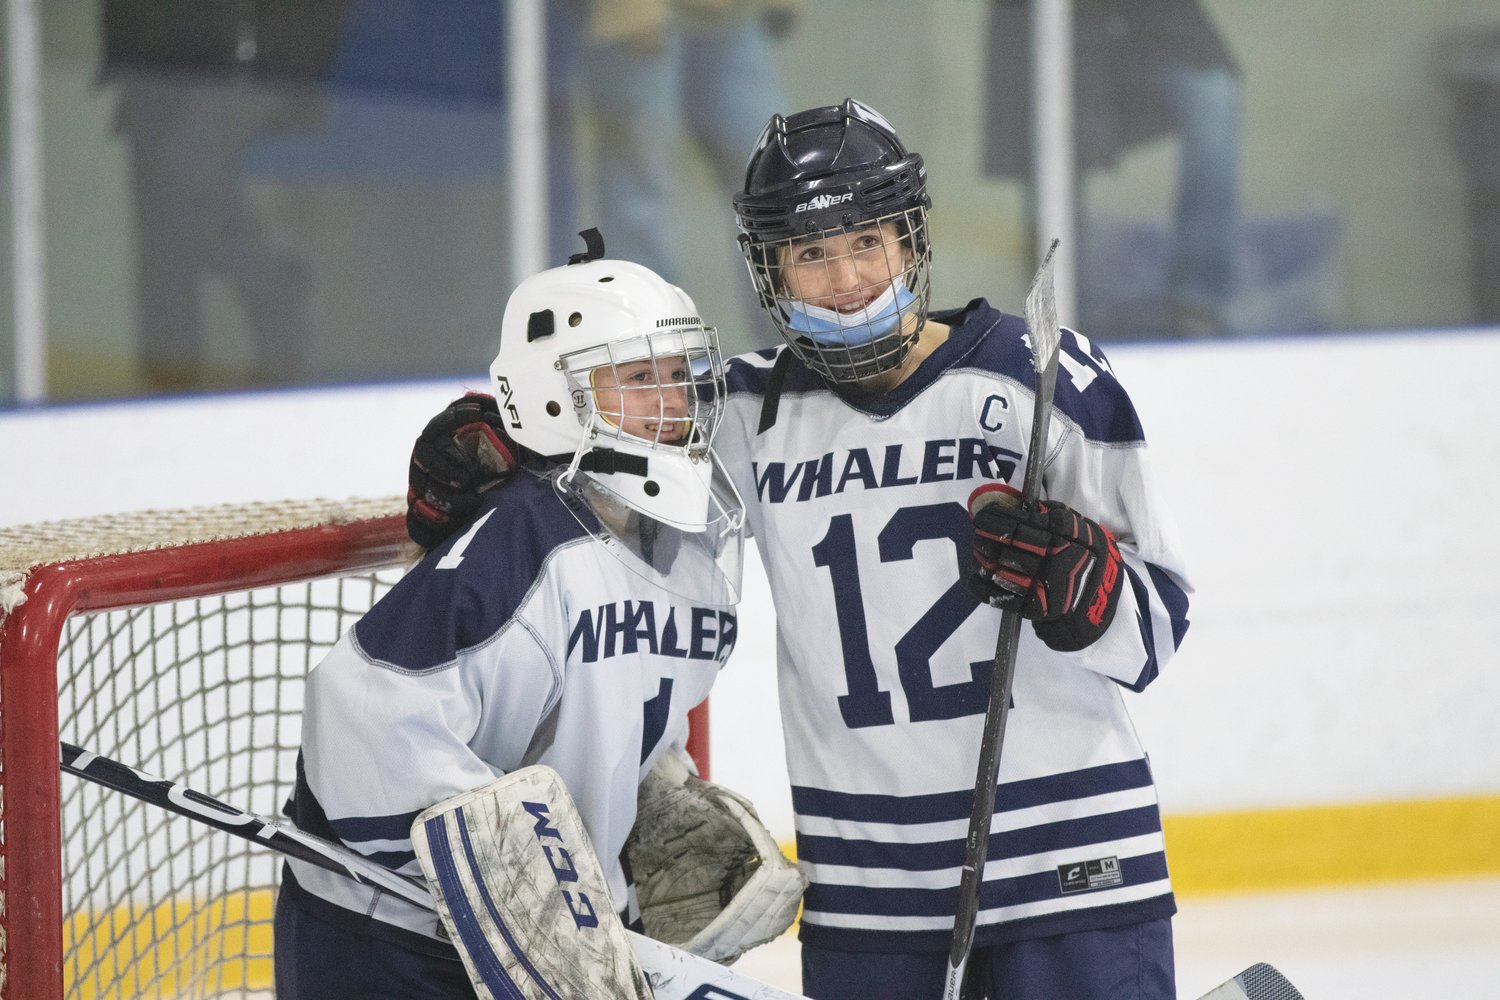 Goalie Caroline Allen and Evelyn Fey, who was the first Whaler to get 50 points in the young program.